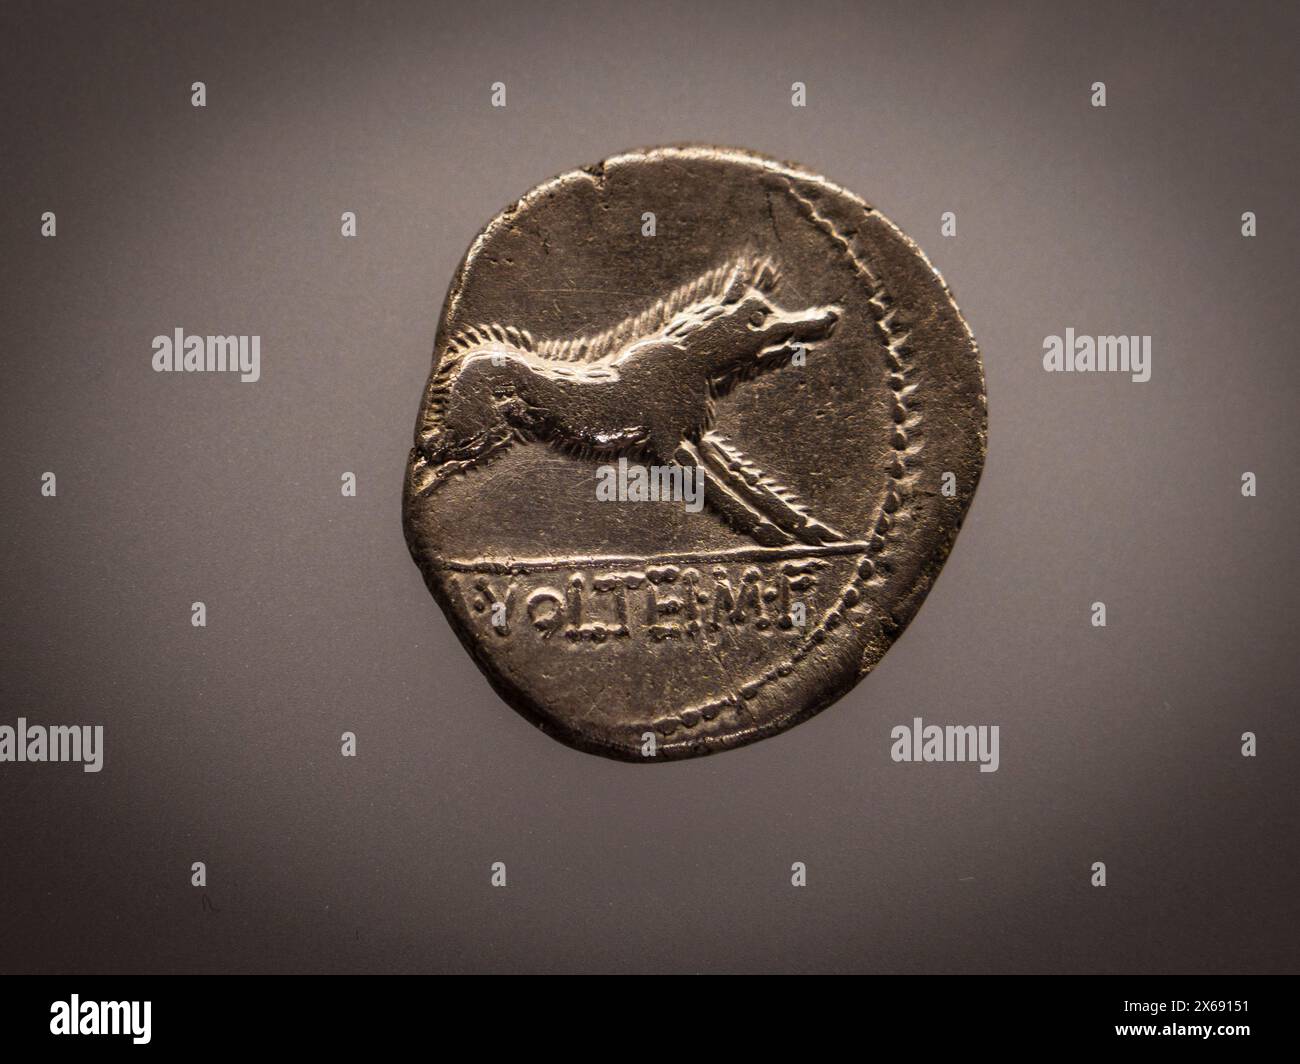 coins from the Iberian period representing the Erymanthian wild boar, Iberian culture, Iberian Museum of Jaén, Andalusia, Spain Stock Photo